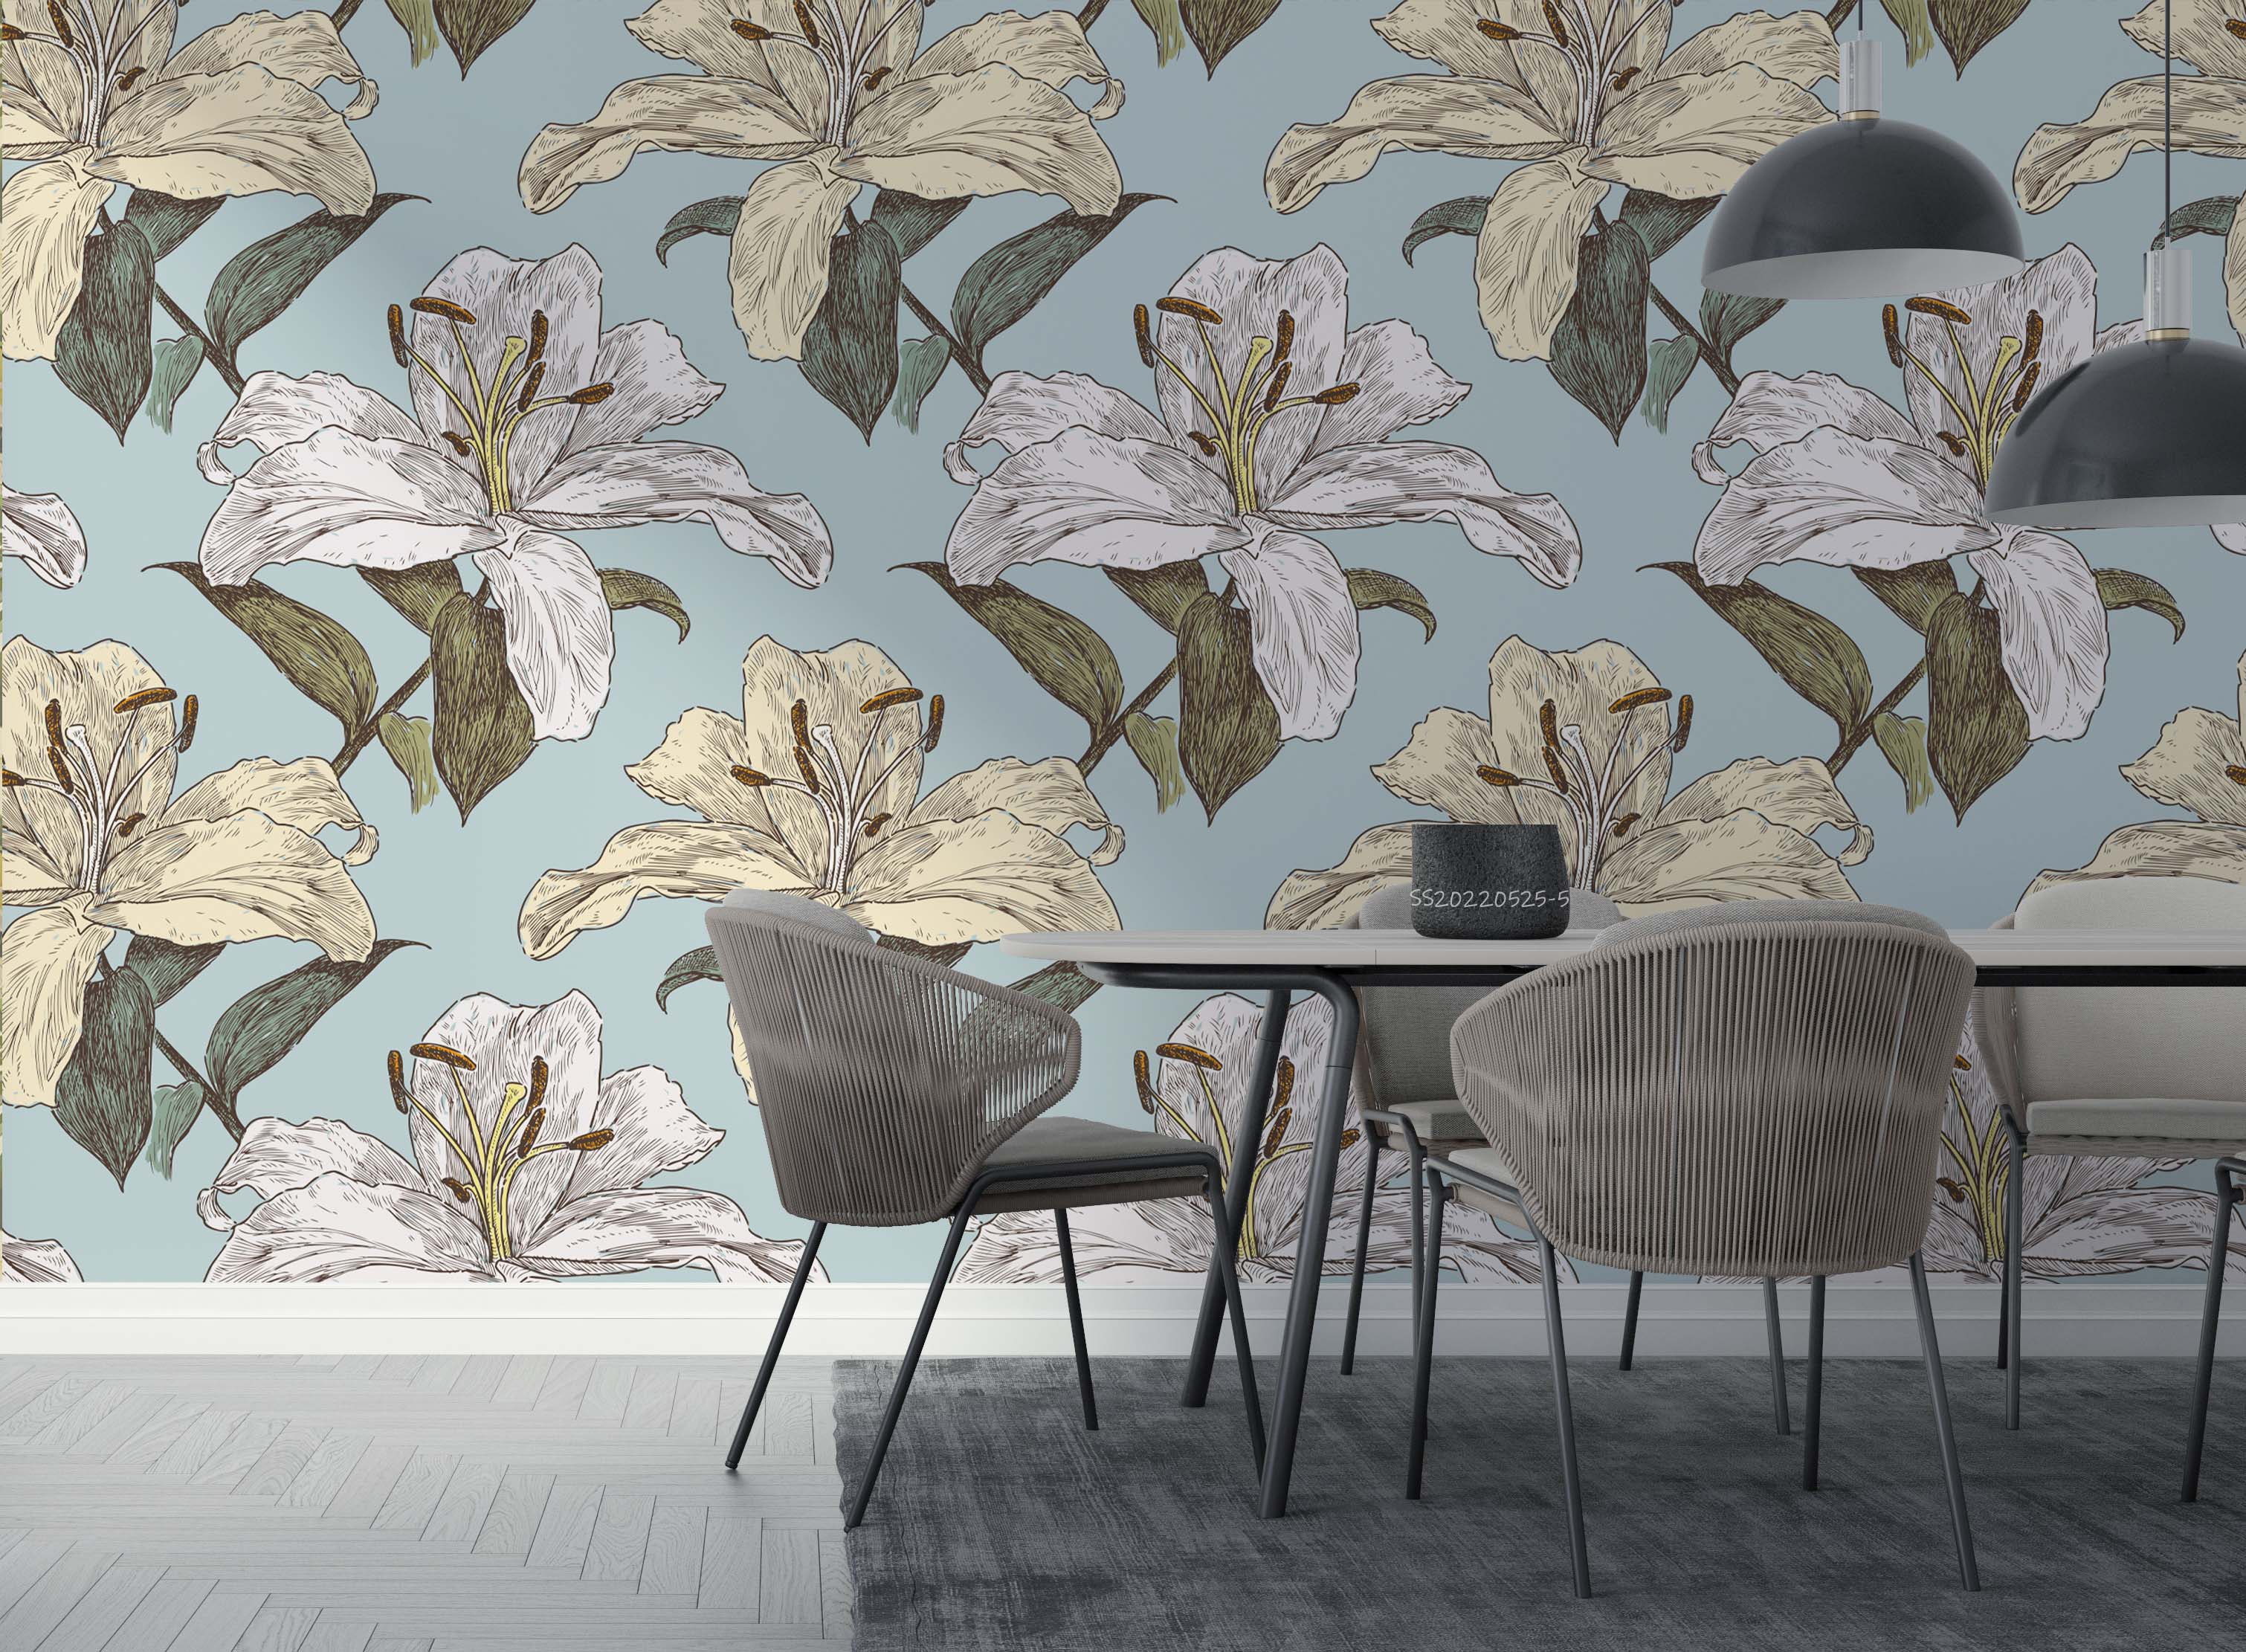 3D Vintage Watercolor Style Lily Floral Pattern Wall Mural Wallpaper GD 972- Jess Art Decoration